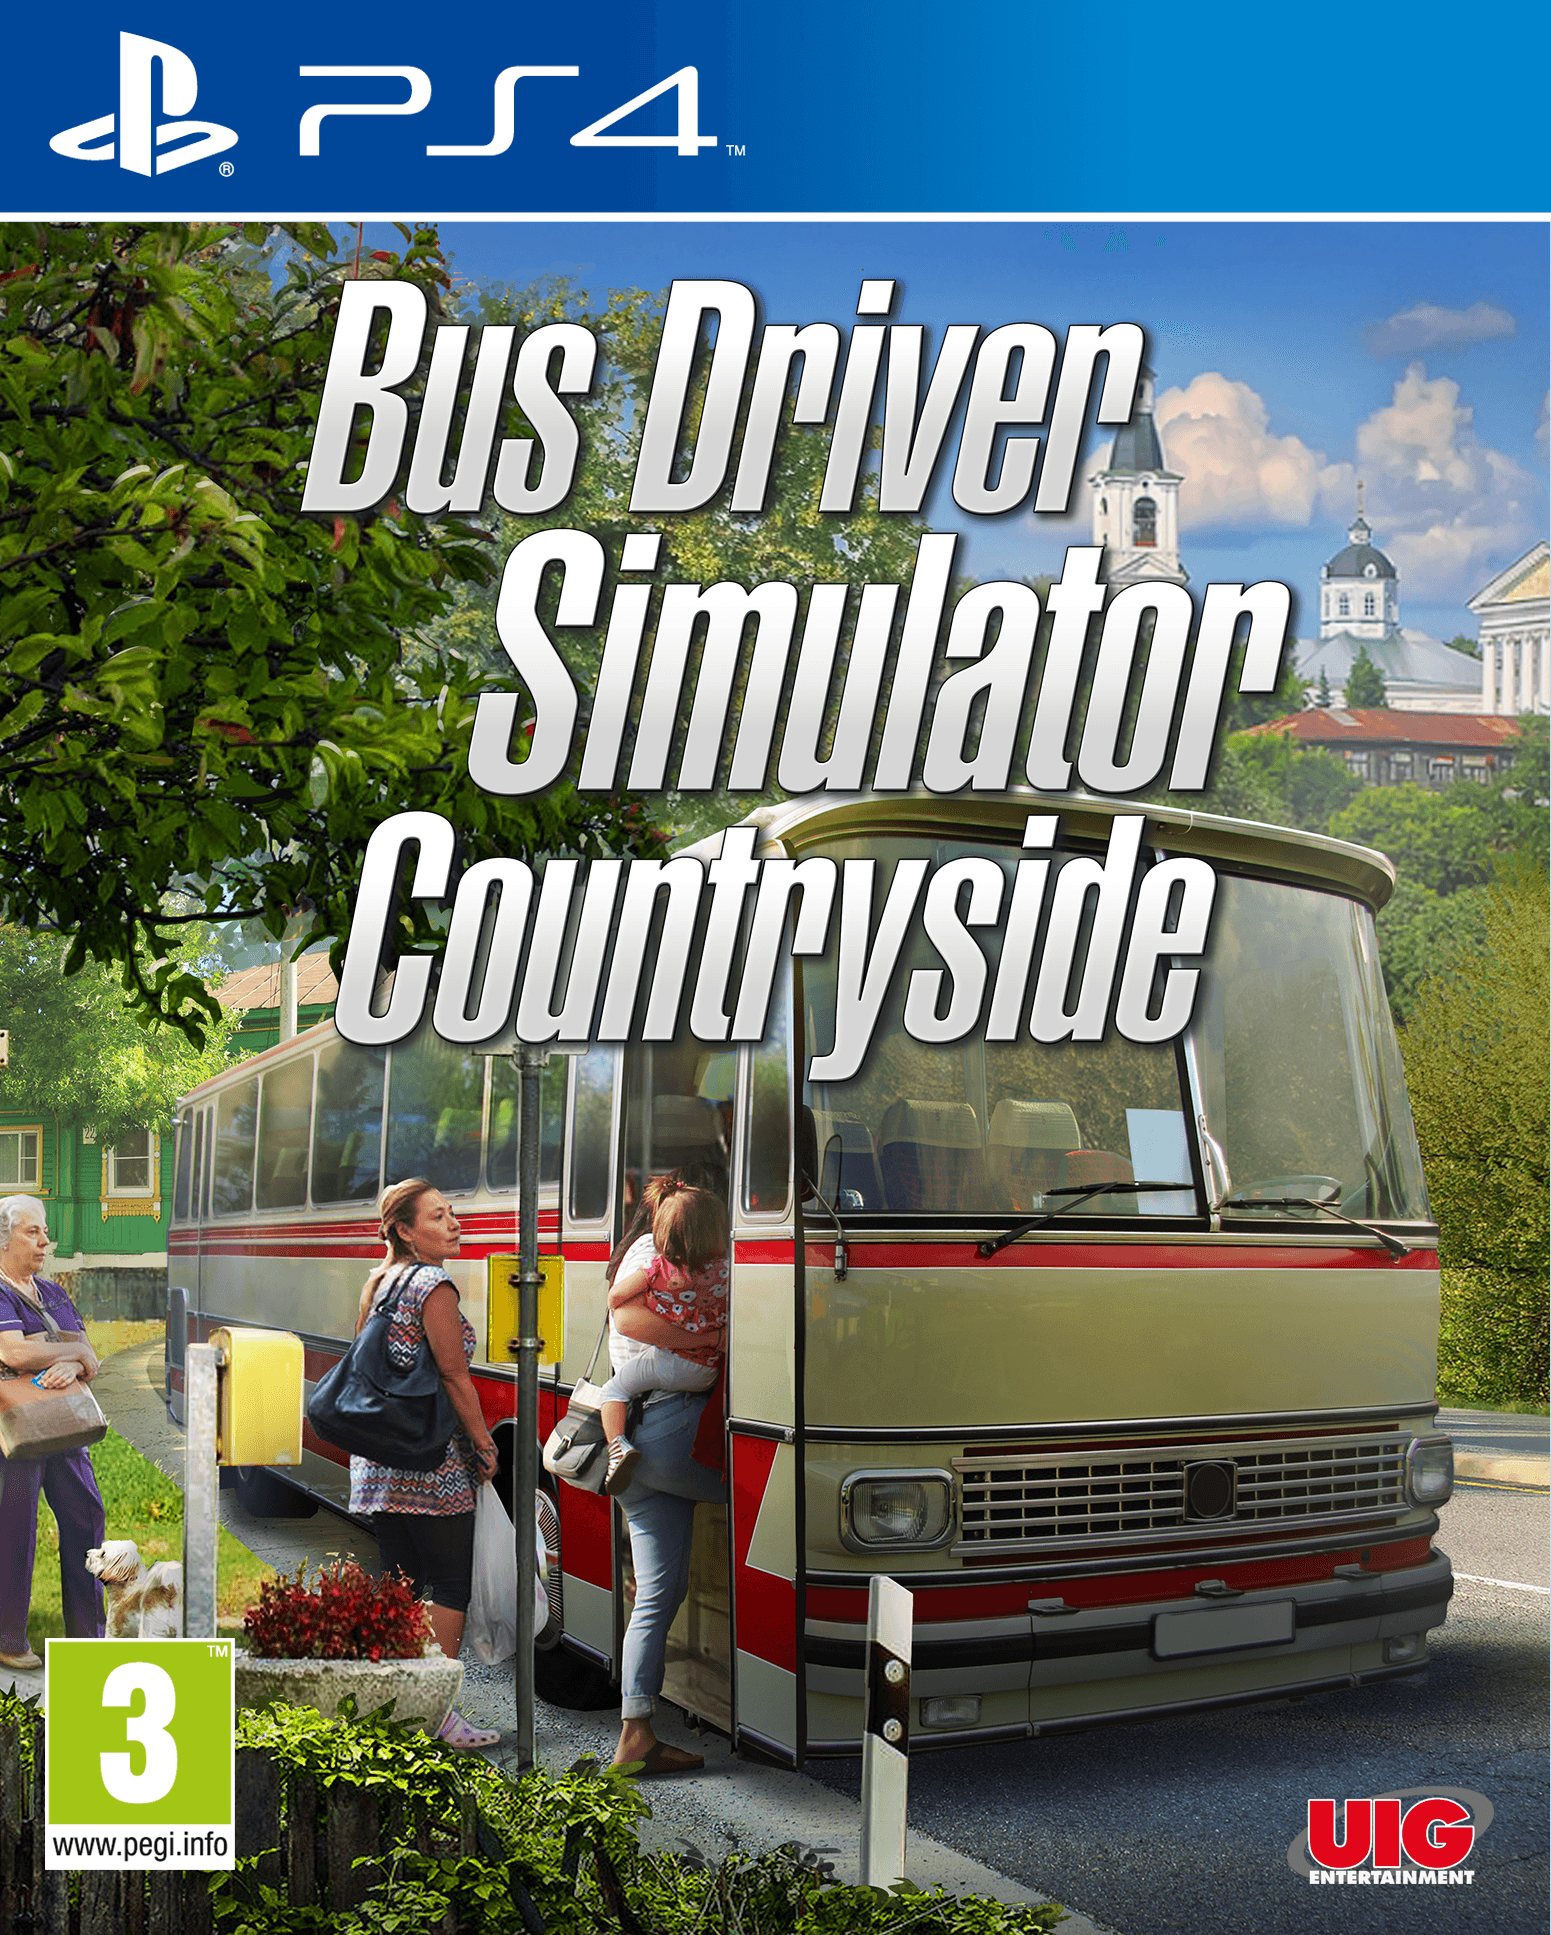 Bus Driver Sim Countryside - Want a New Gadget